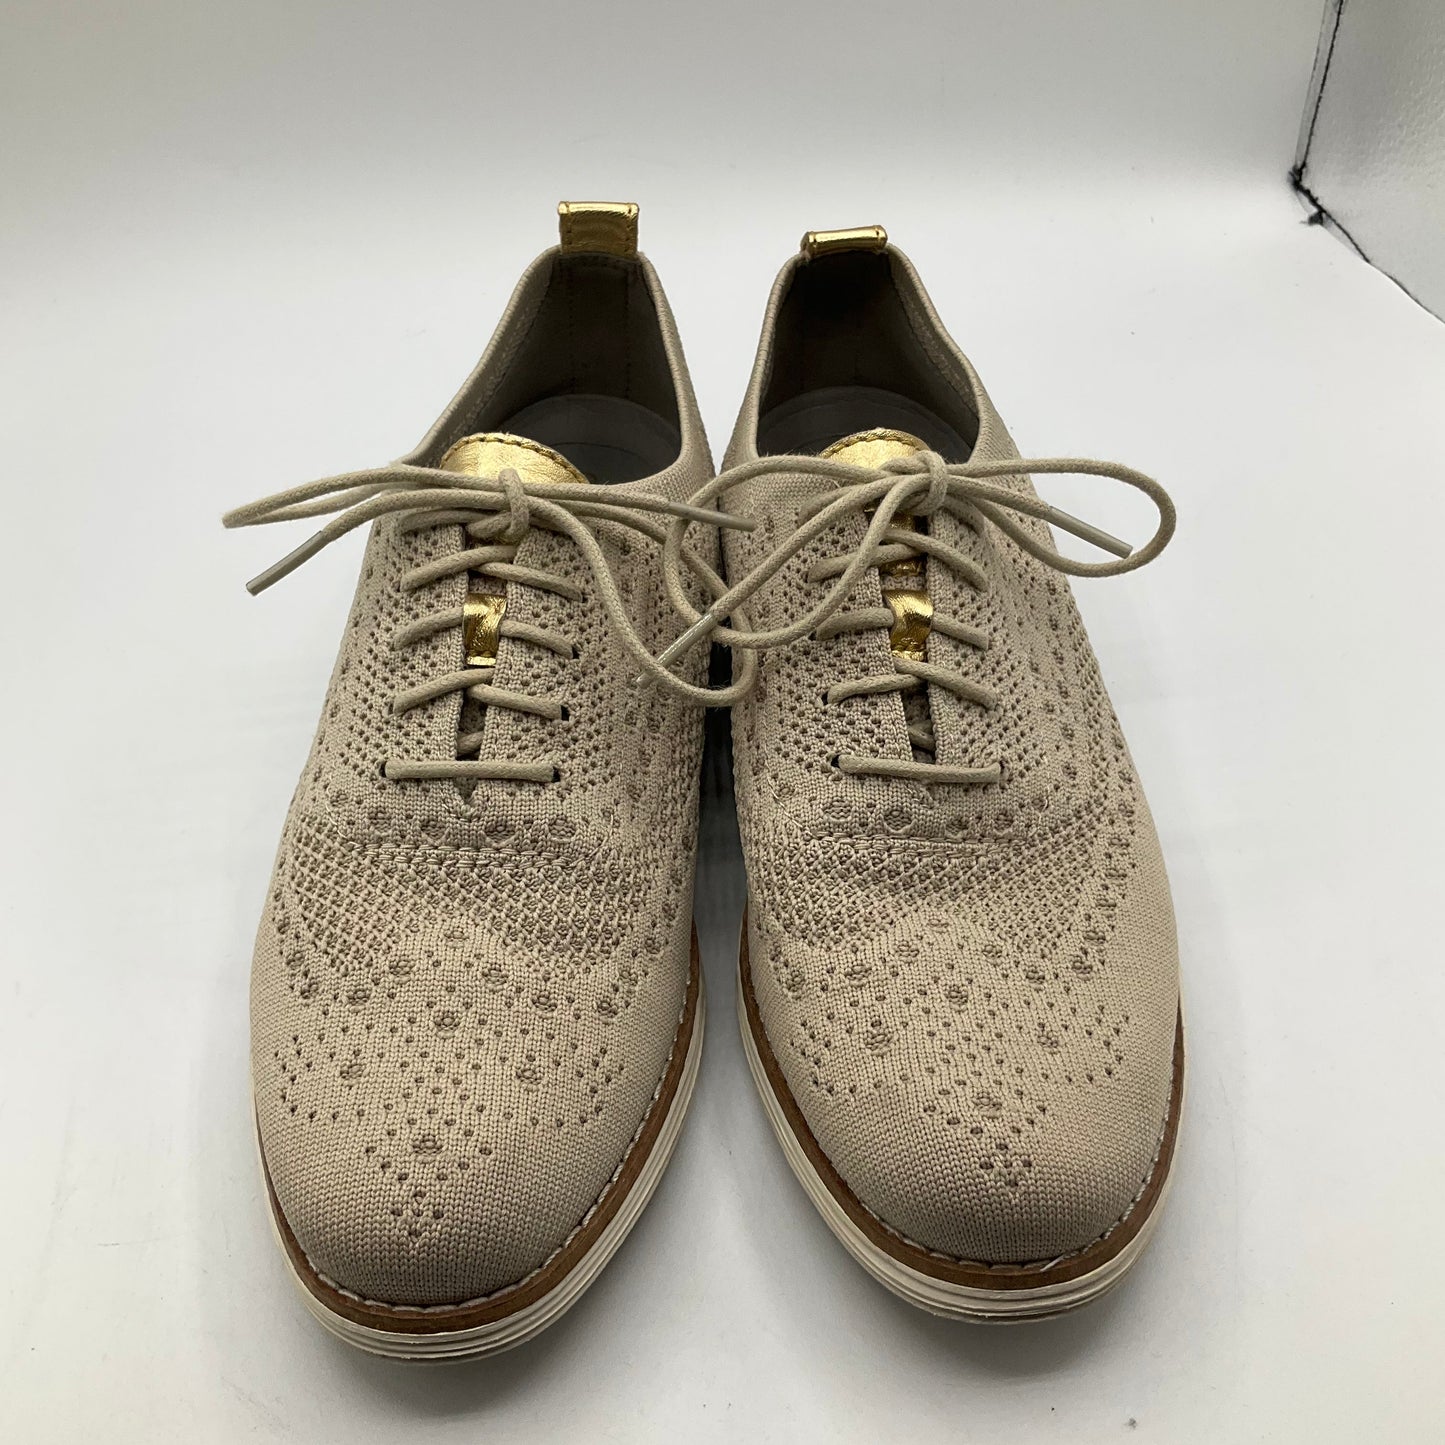 Tan Shoes Flats Cole-haan, Size 7.5